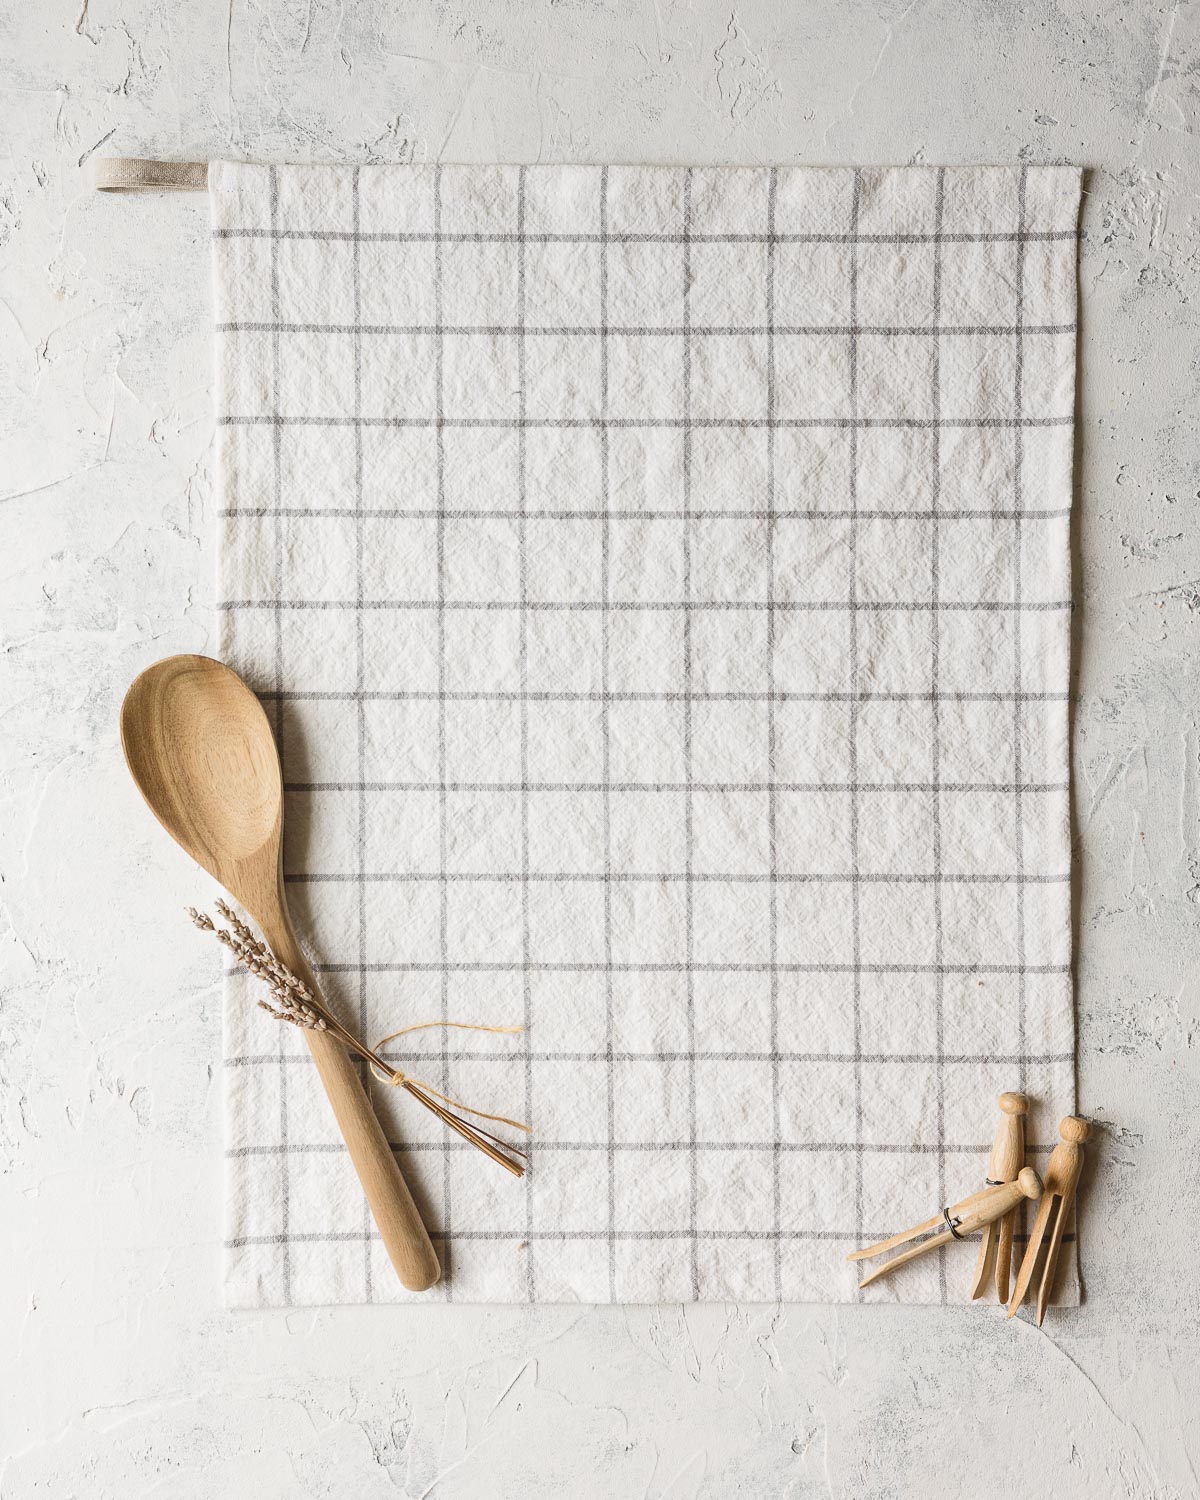 A handmade kitchen towel of linen with a gray grid design and a wooden spoon, lavender, and vintage clothespins displayed on top.